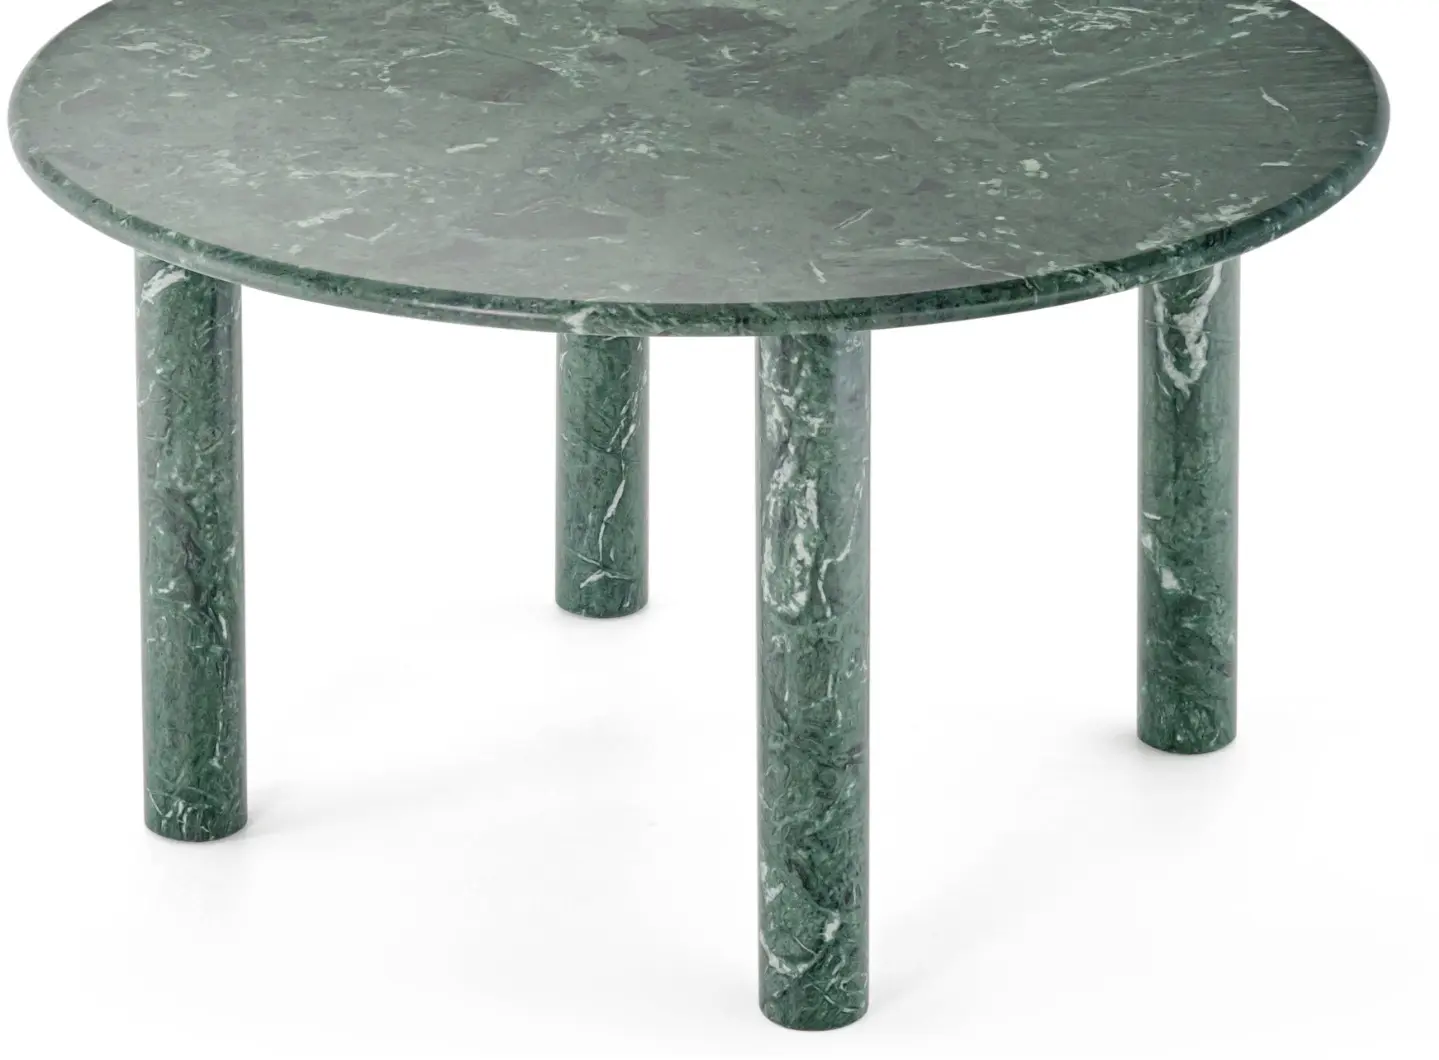 PAUL_DINING_TABLE_LIMITED_EDITION__4___.jpg